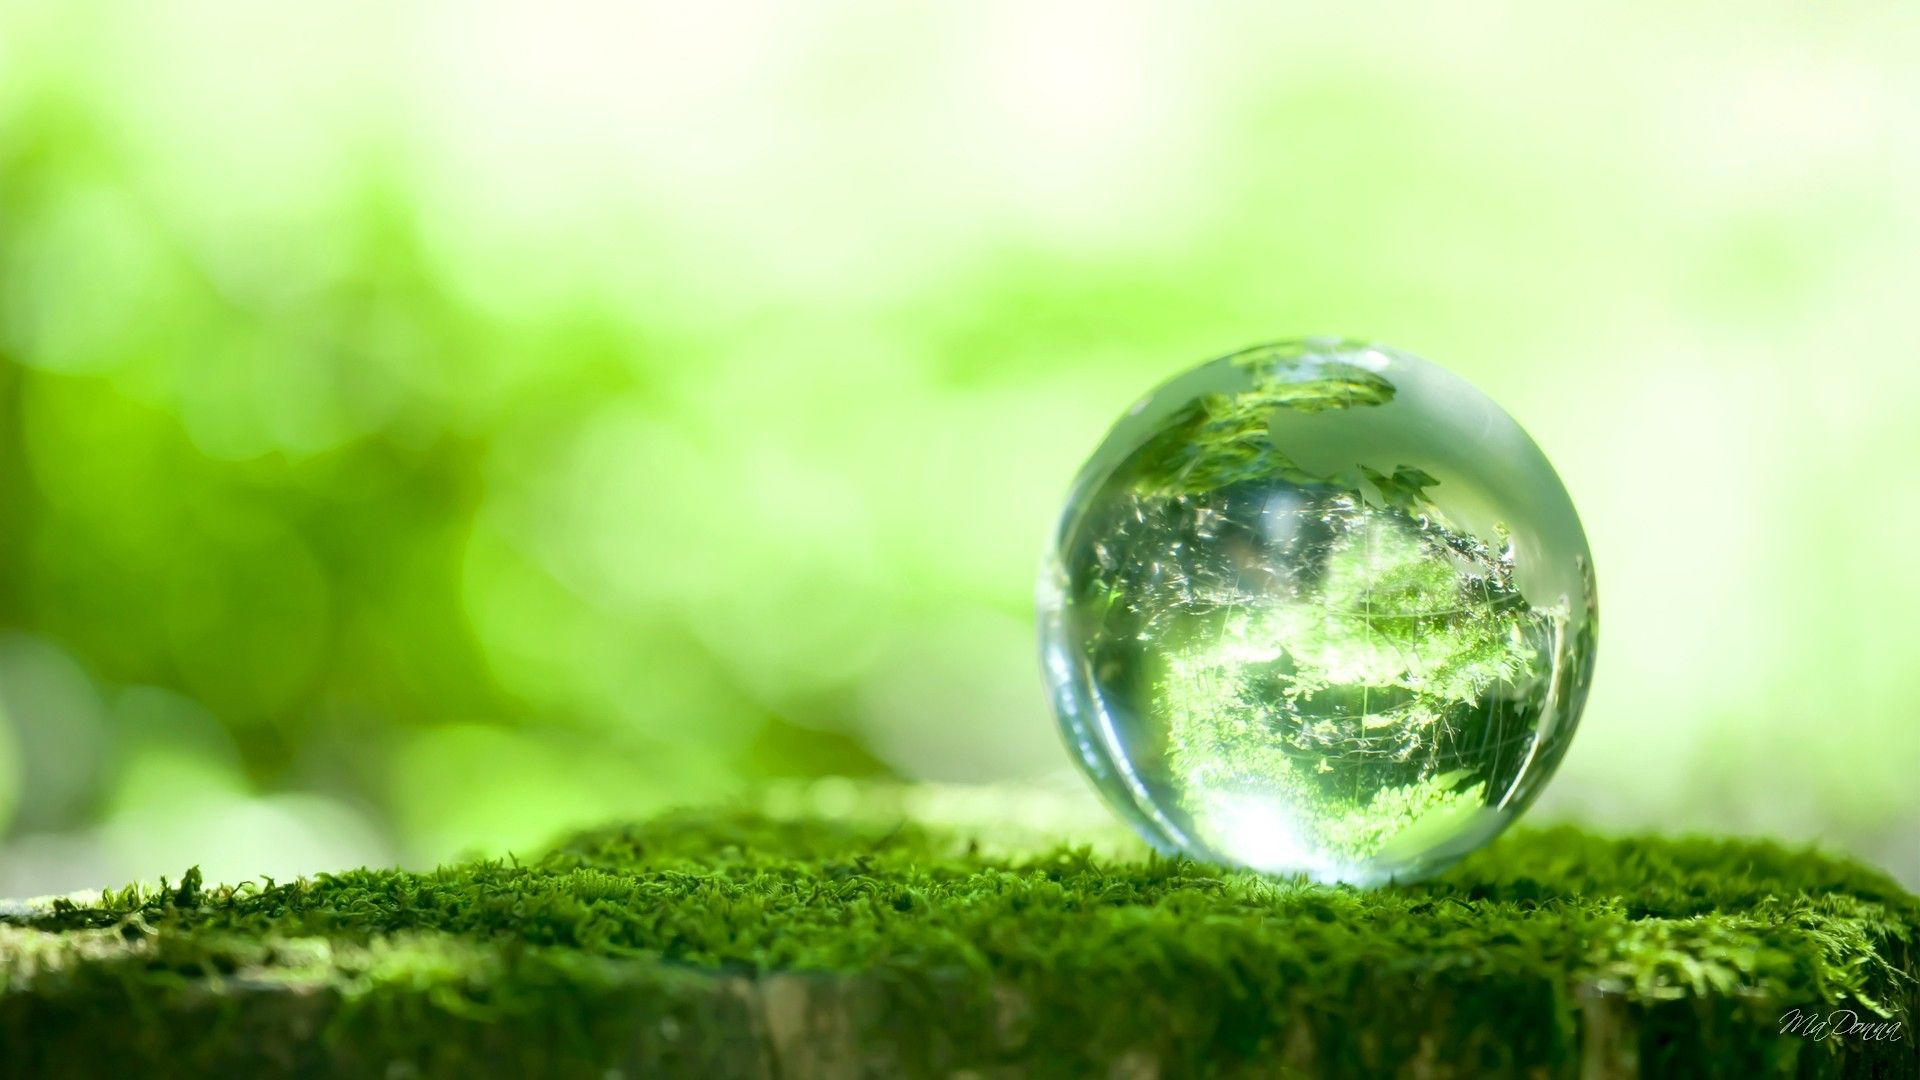 Cluster-Têxtil-Conference | Brokerage Event Green Growth and Circular Economy Thinking